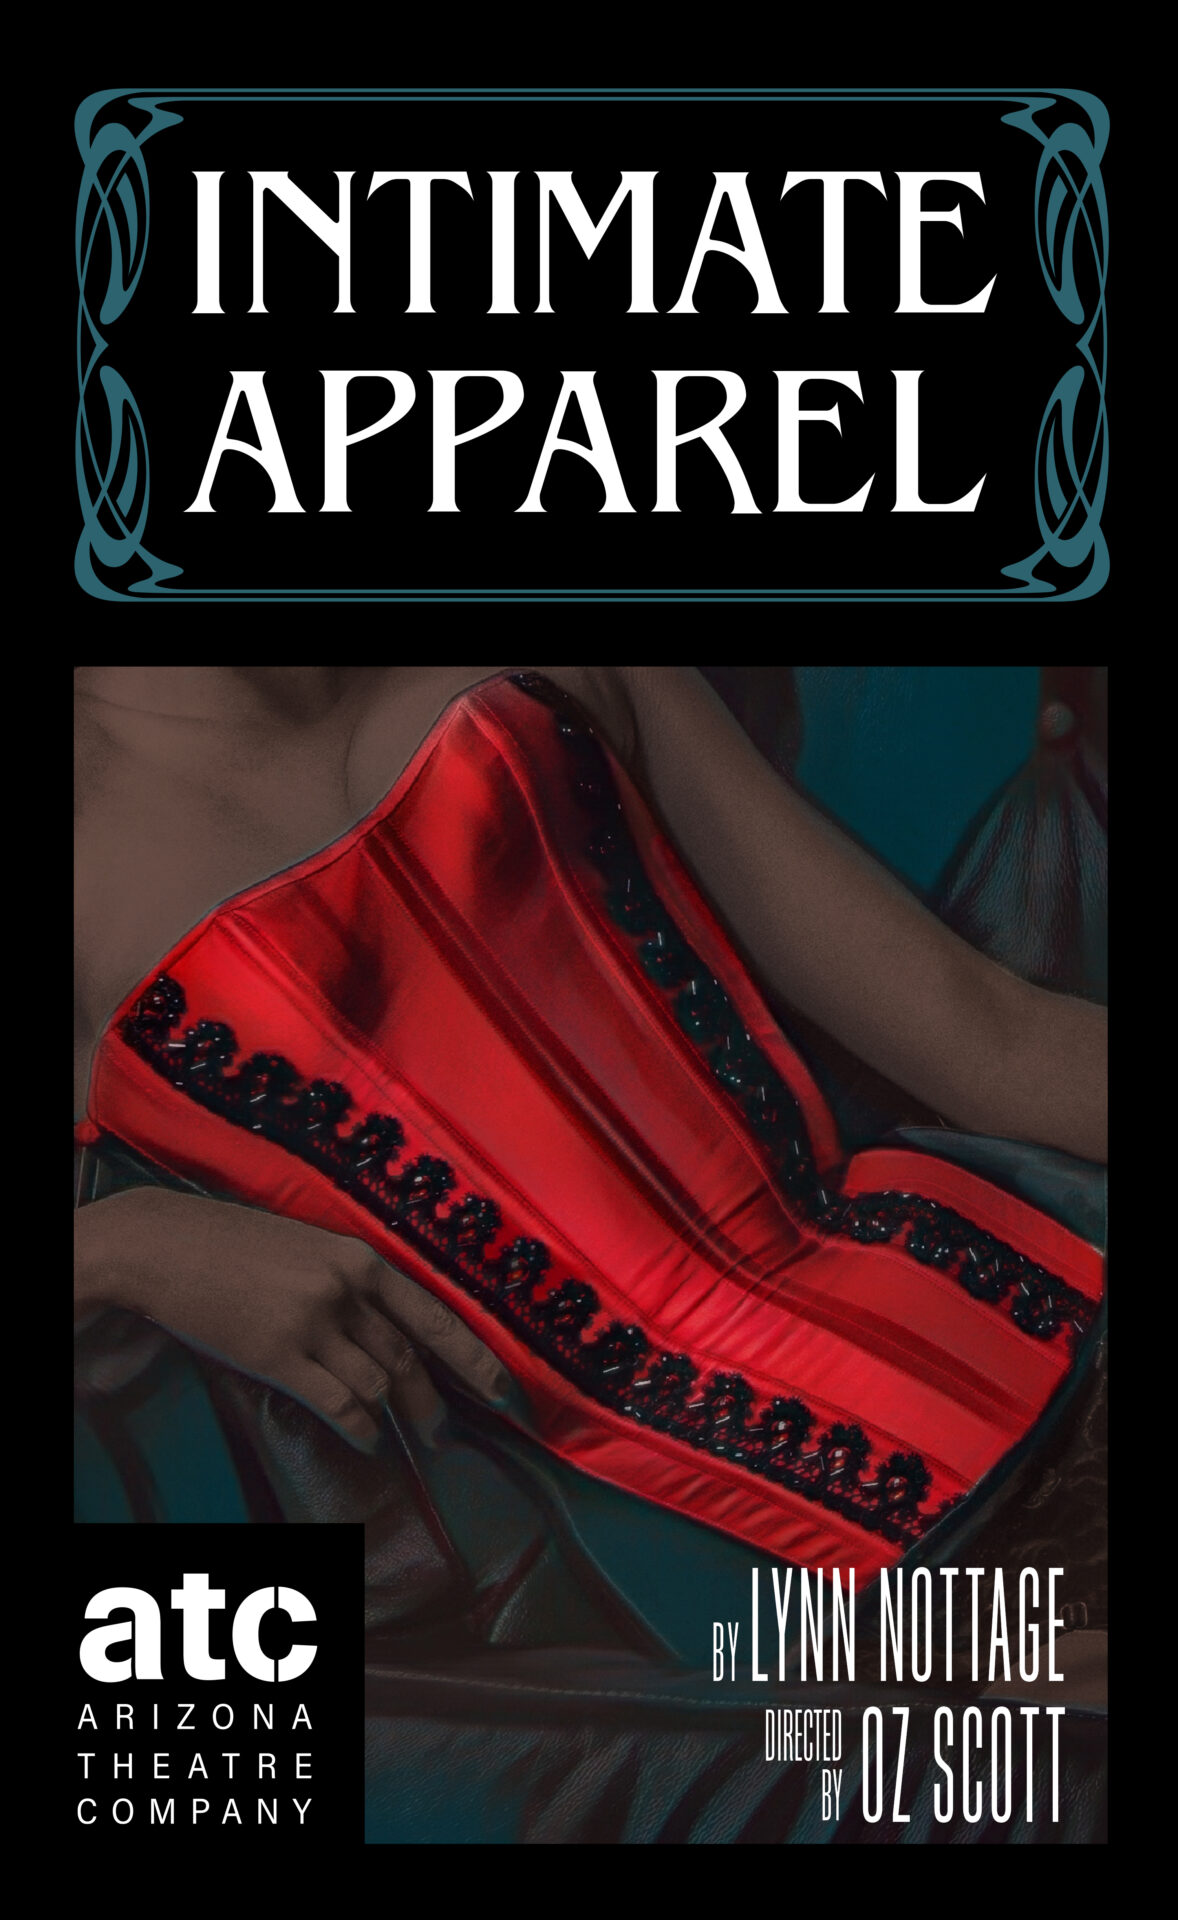 Intimate Apparel' offers intimate show in intimate space